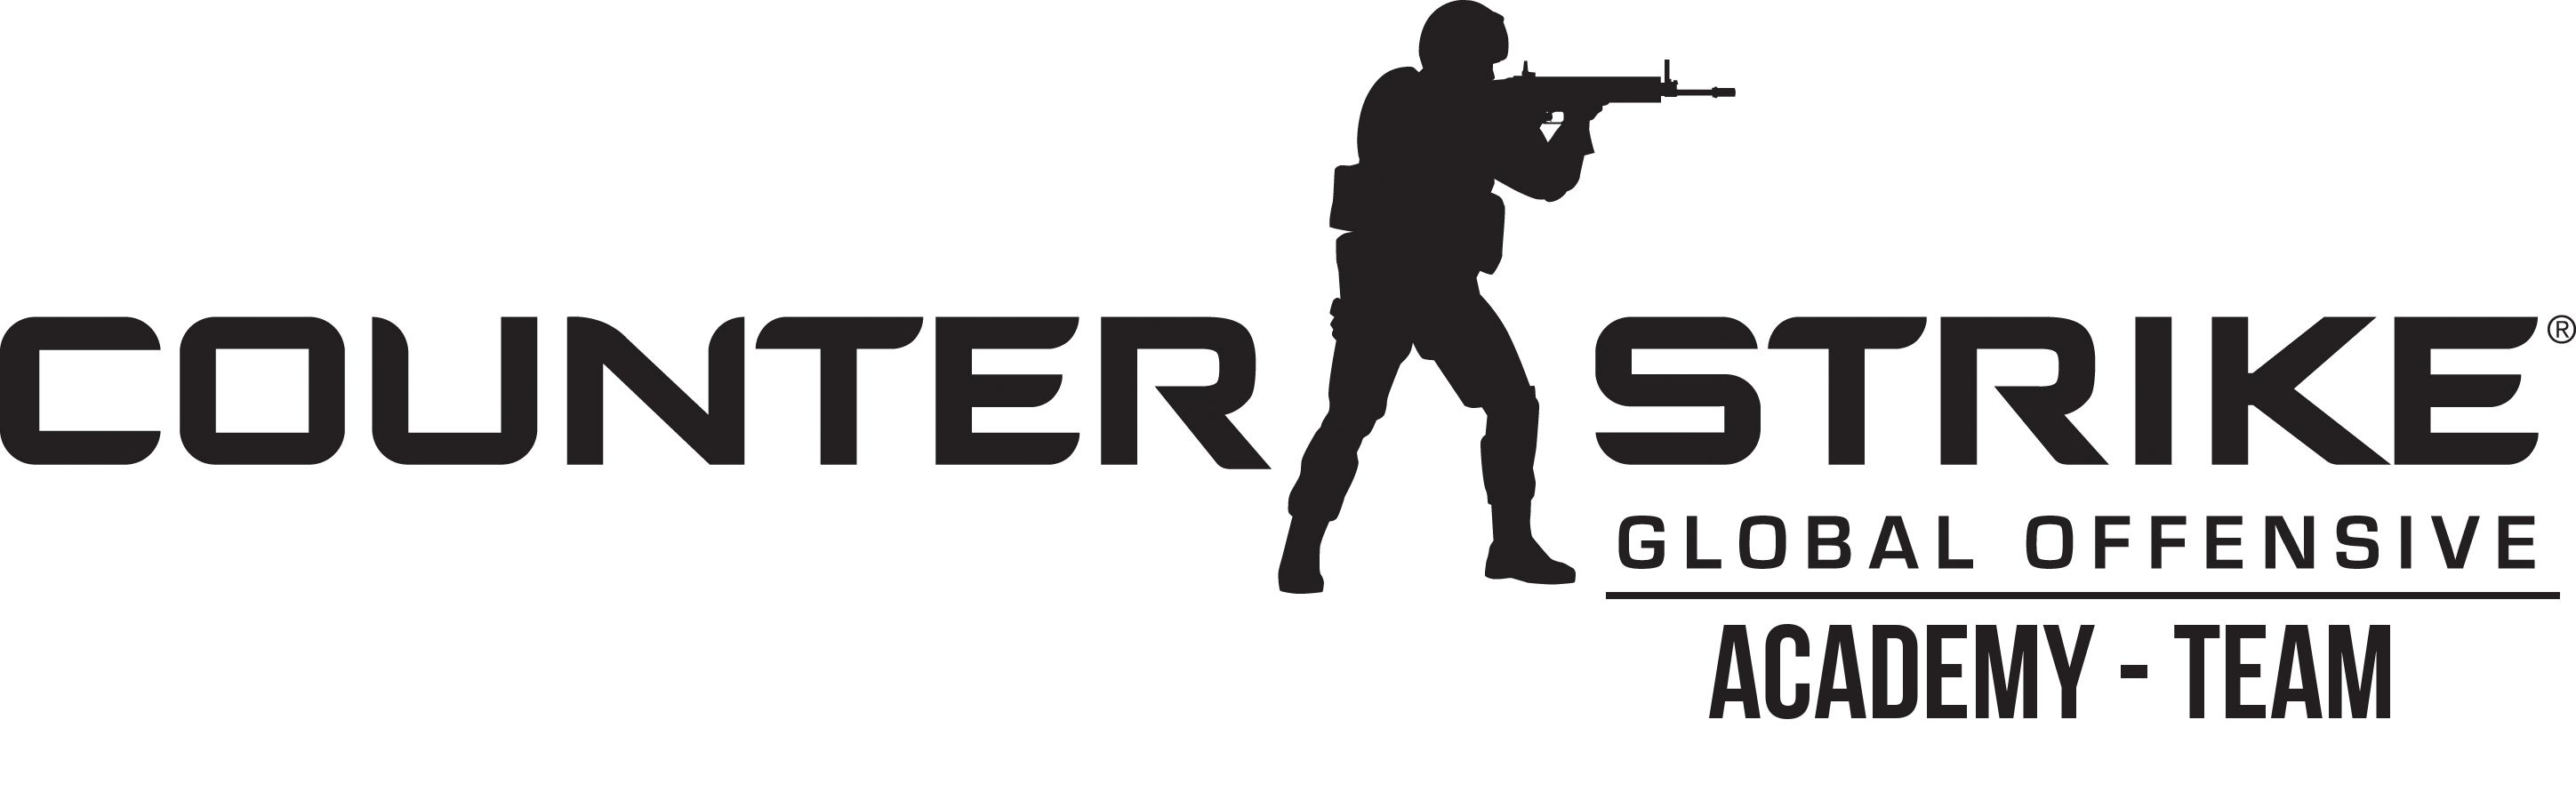 Text Brand Global Offensive Source Counterstrike PNG Image